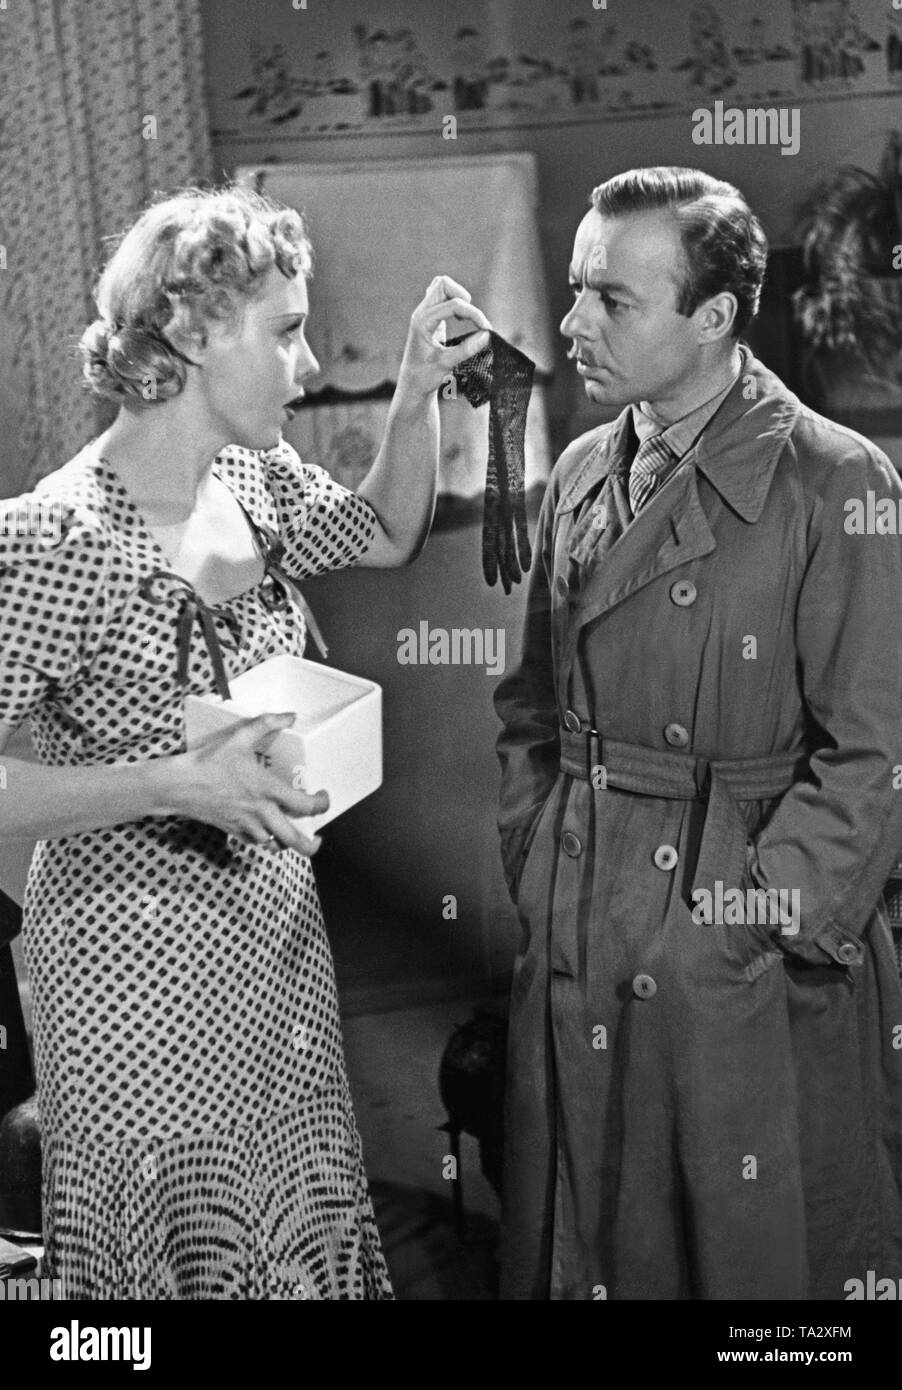 Heinz Ruehmann as Hermann Knittel and Anny Ondra as Erika Knittel in the movie 'The Gasman' by Carl Froehlich, based on the eponymous novel by Heinrich Spoerl. Stock Photo